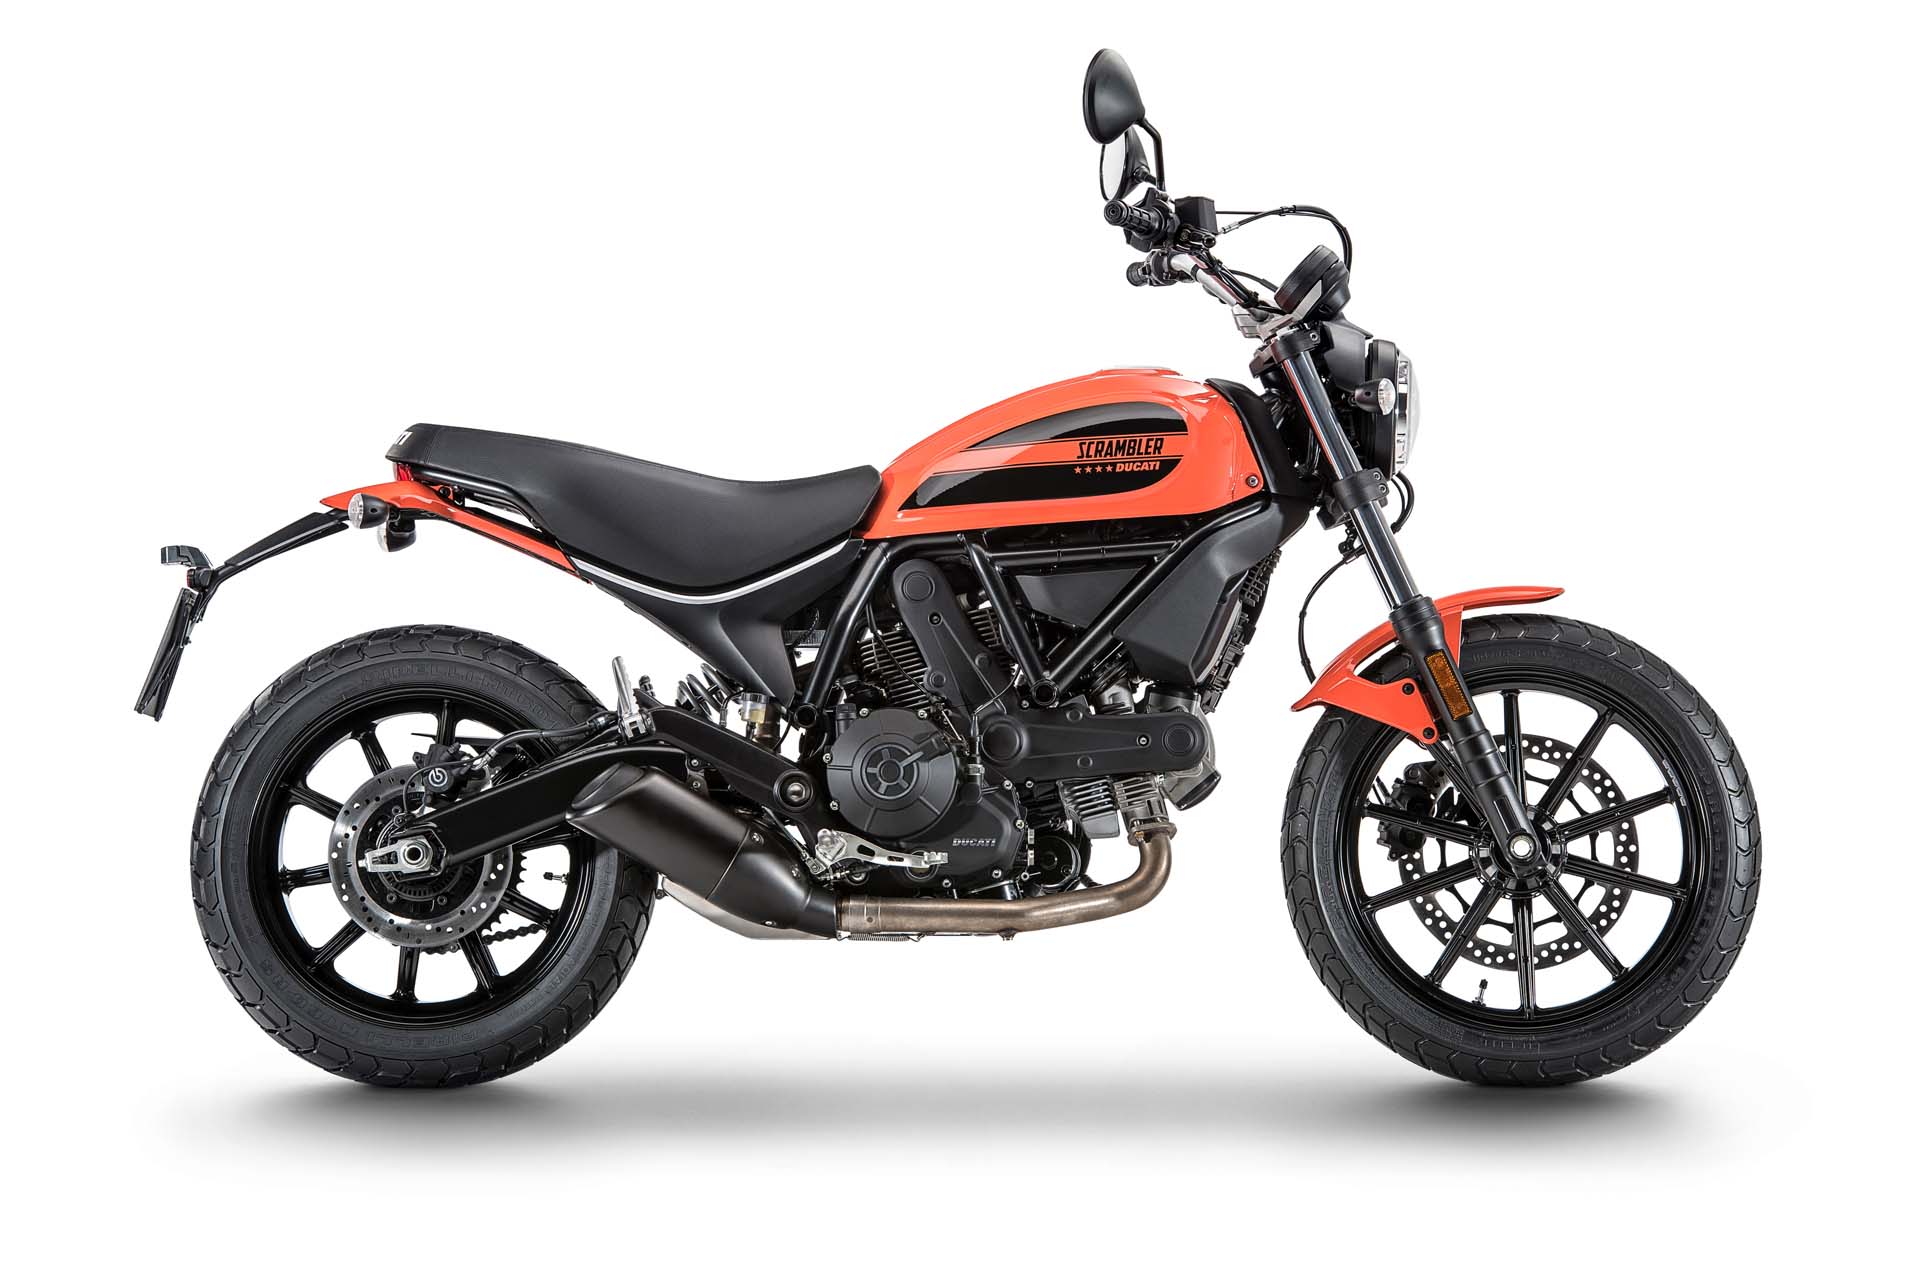 What has 400 cc, 41 hp and will make Ducati a hell of a lot of money in 2016? The Ducati Scrambler Sixty2. The latest addition to the wildly successful Scrambler range, this new entry-level bike with its diminutive 167-kg chassis looks like it will be more fun than a barrel of monkeys.